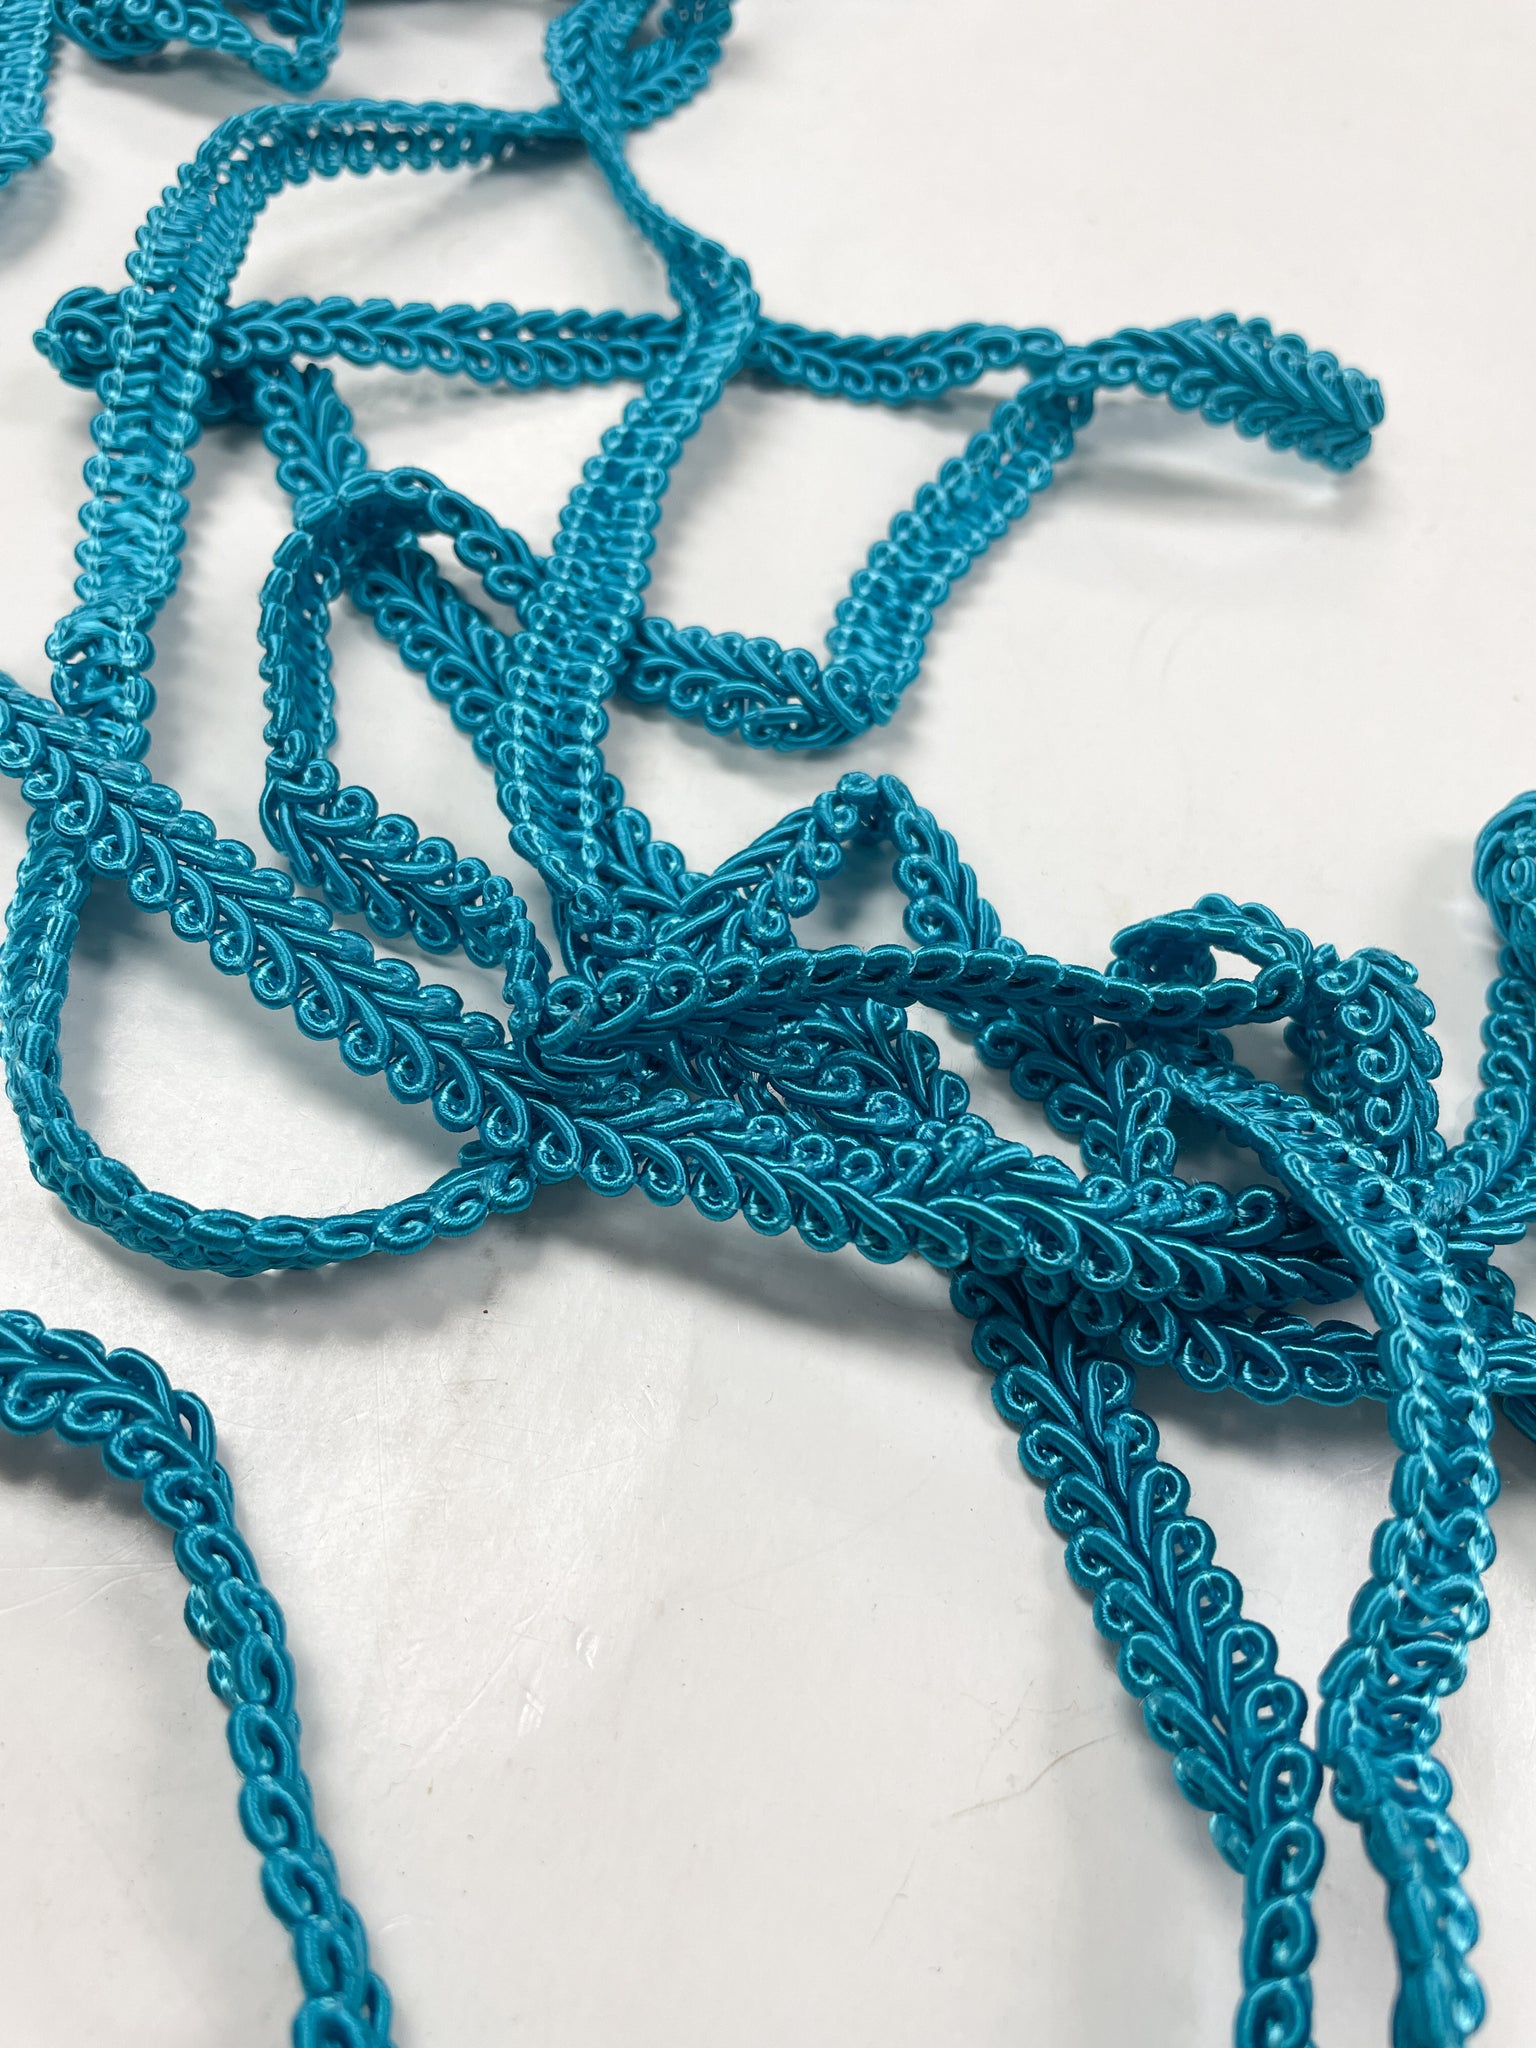 3 2/3 YD Gimp Trim-by-the-Yard - Turquoise